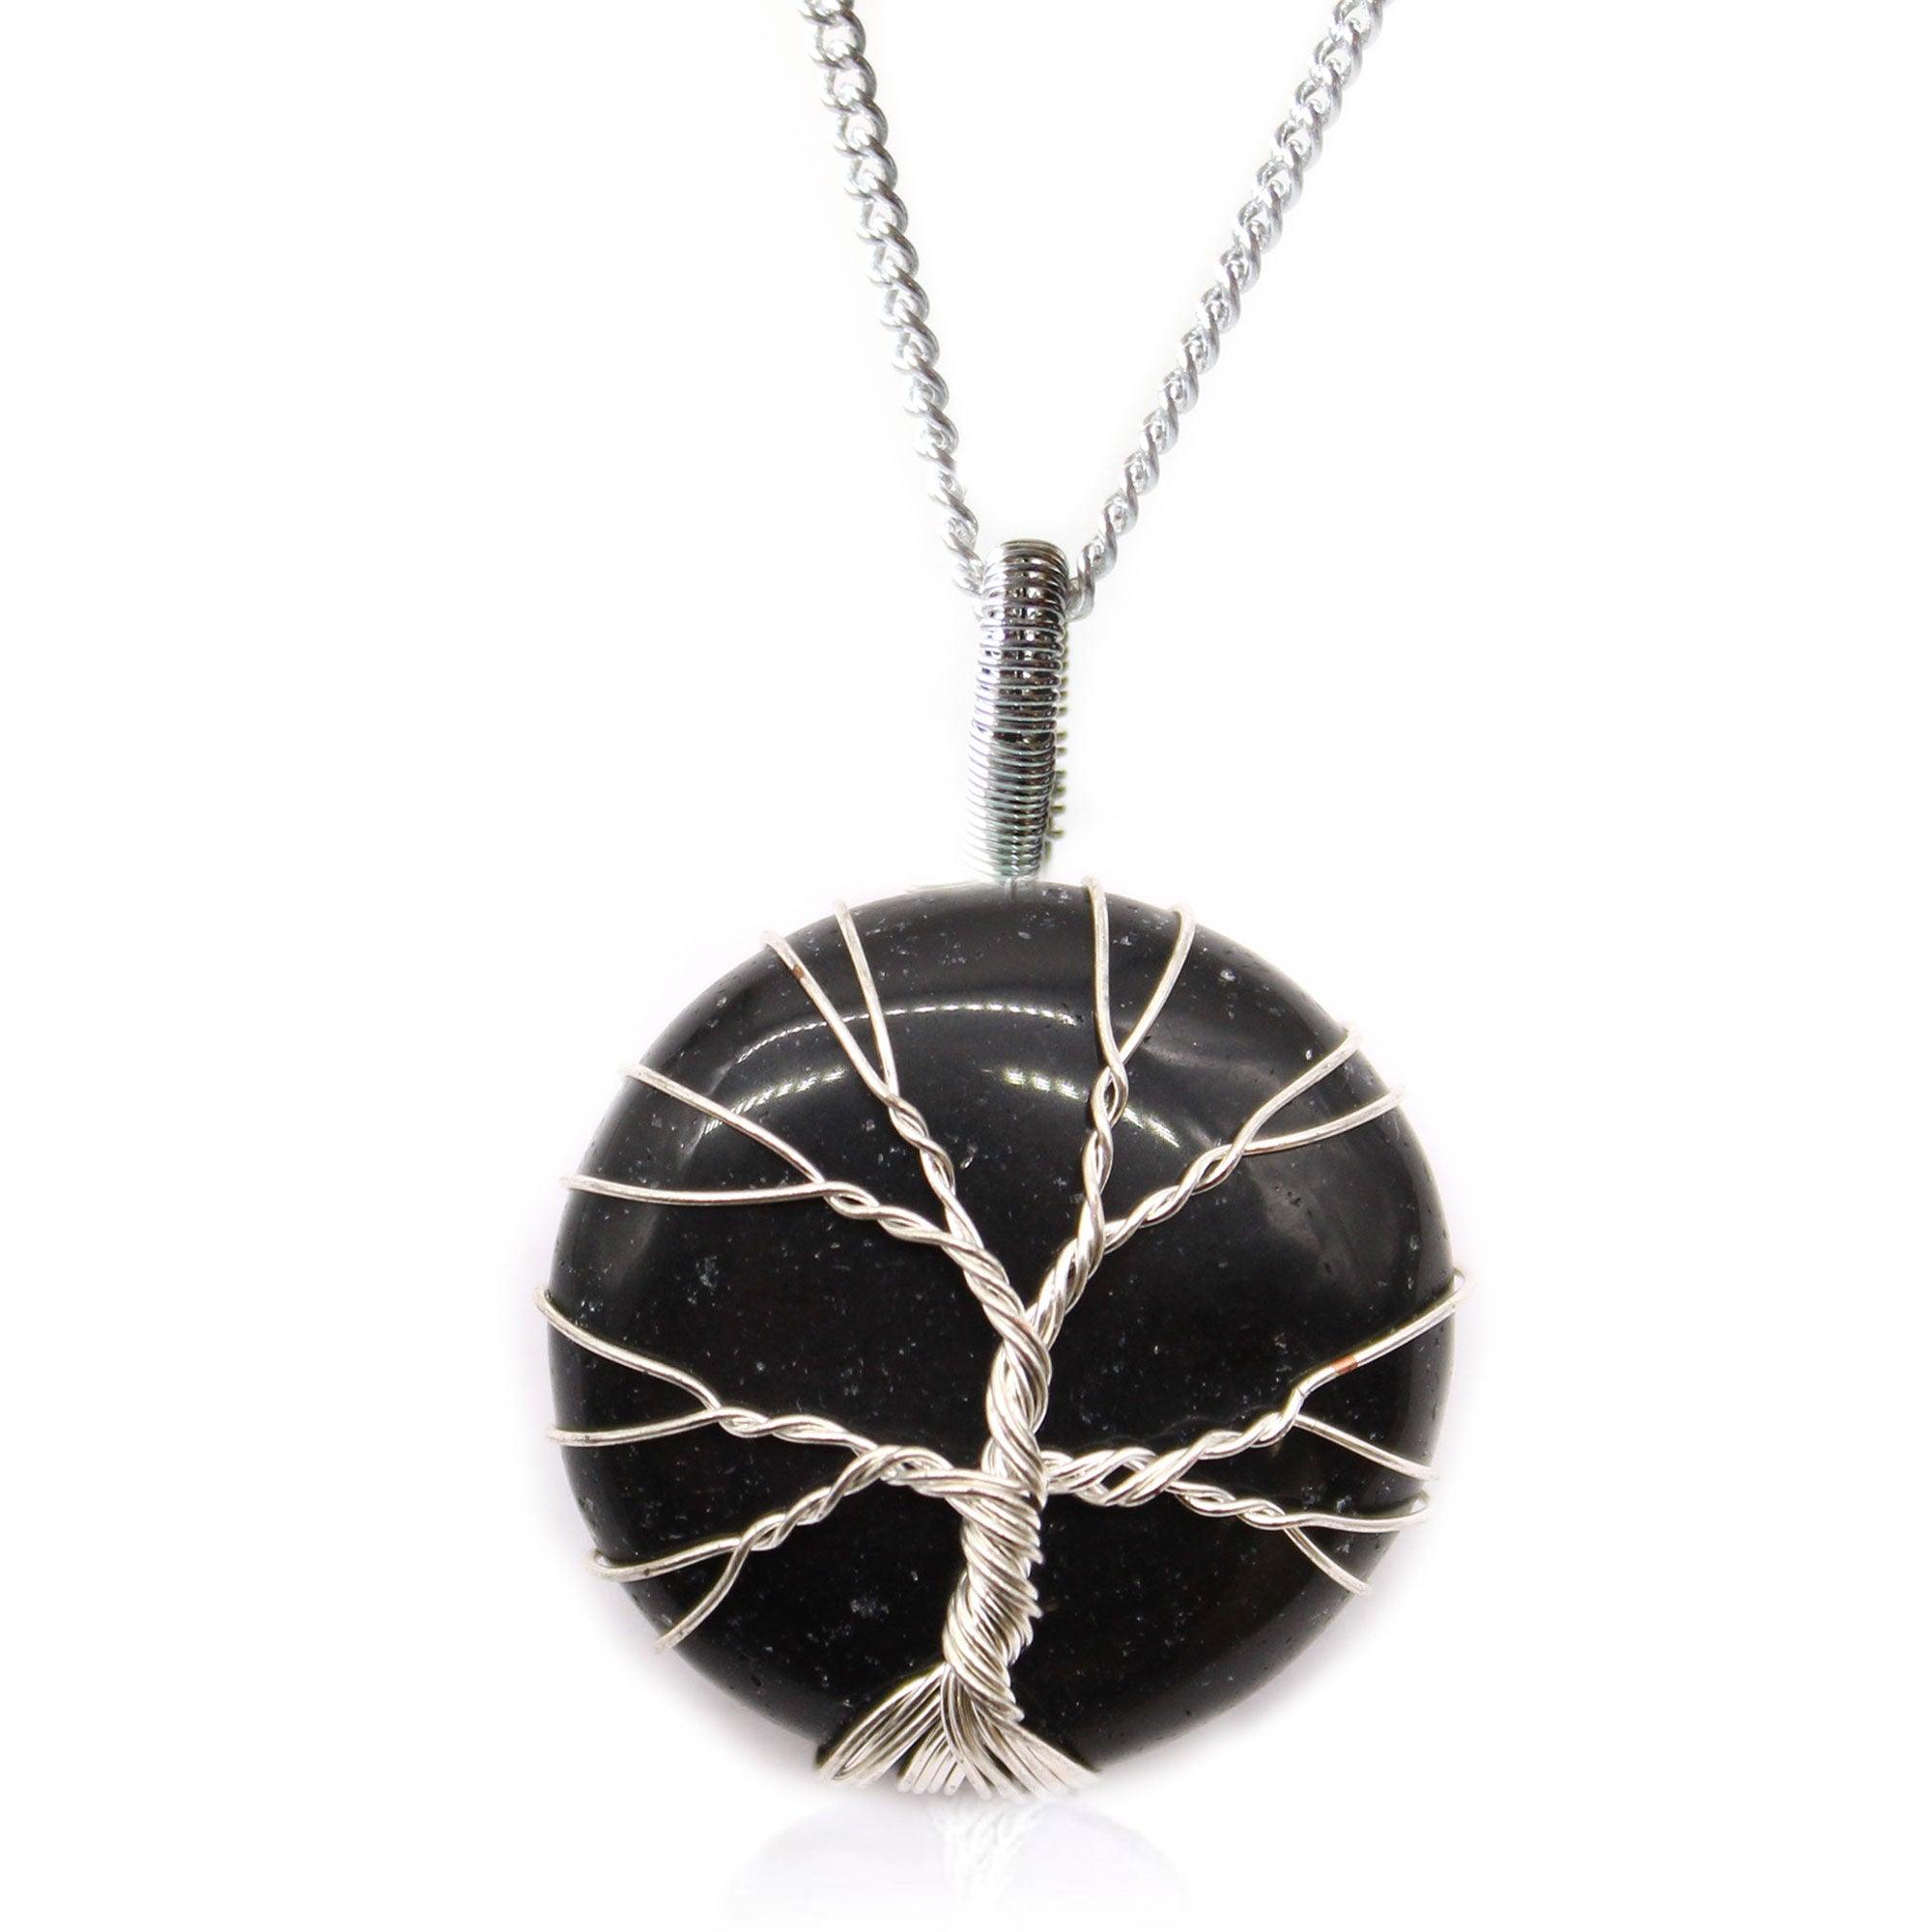 Tree of Life Gemstone Necklace - Black Onyx - Charming Spaces